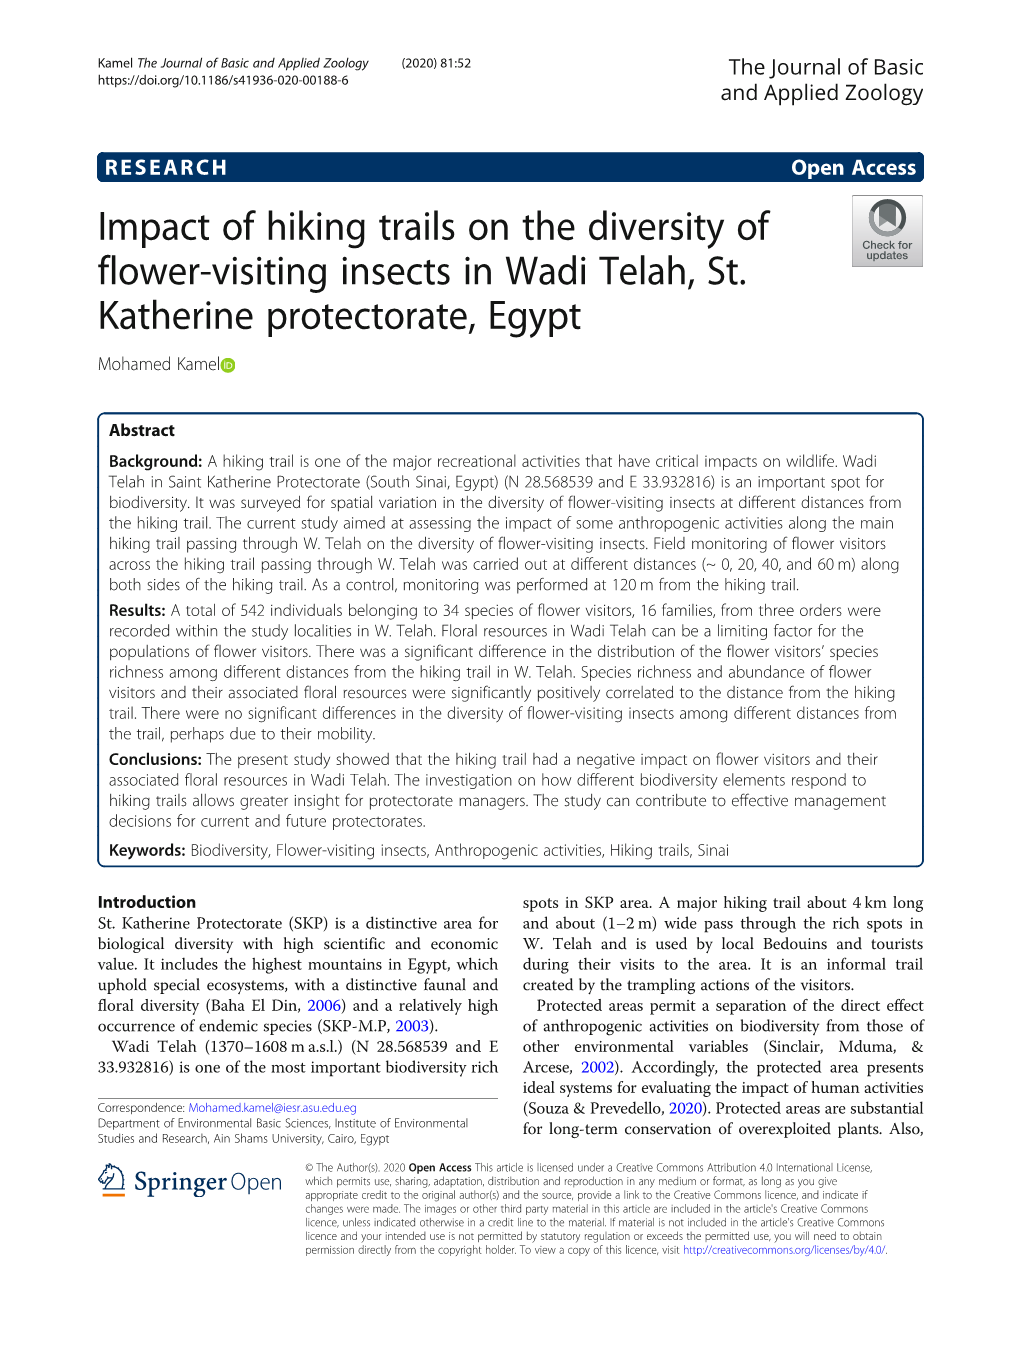 Impact of Hiking Trails on the Diversity of Flower-Visiting Insects in Wadi Telah, St